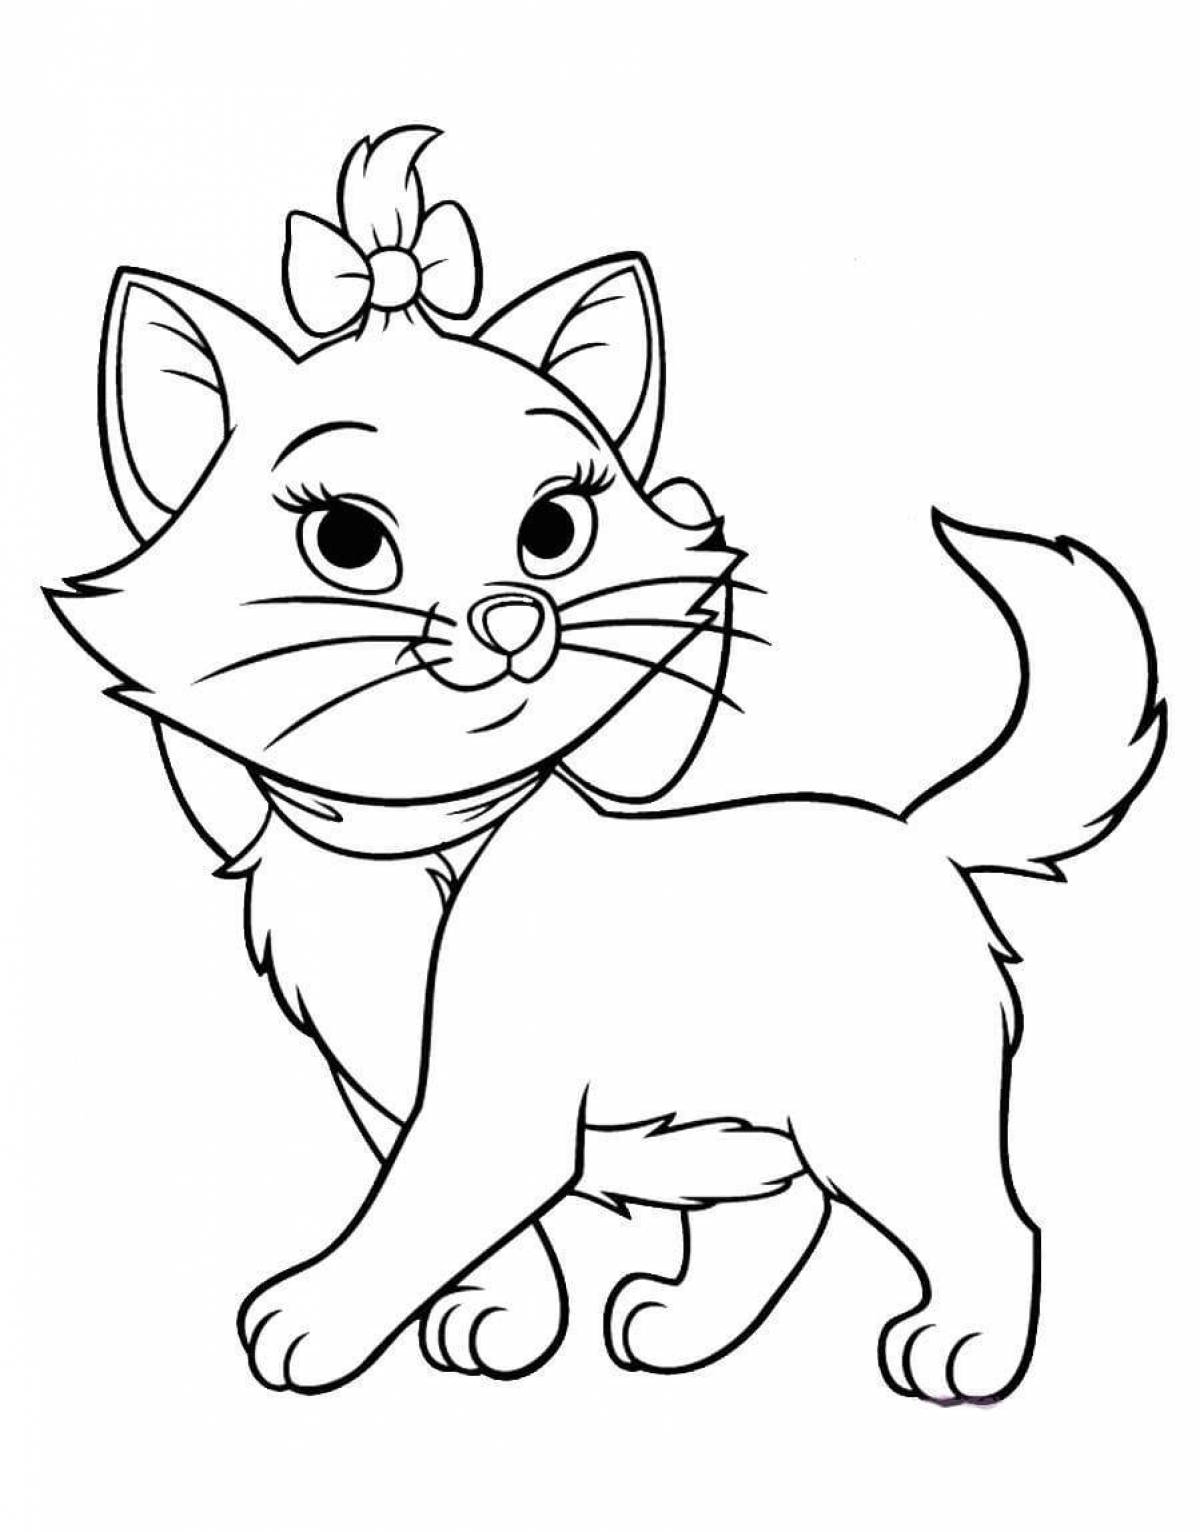 Fun coloring cat for children 3-4 years old